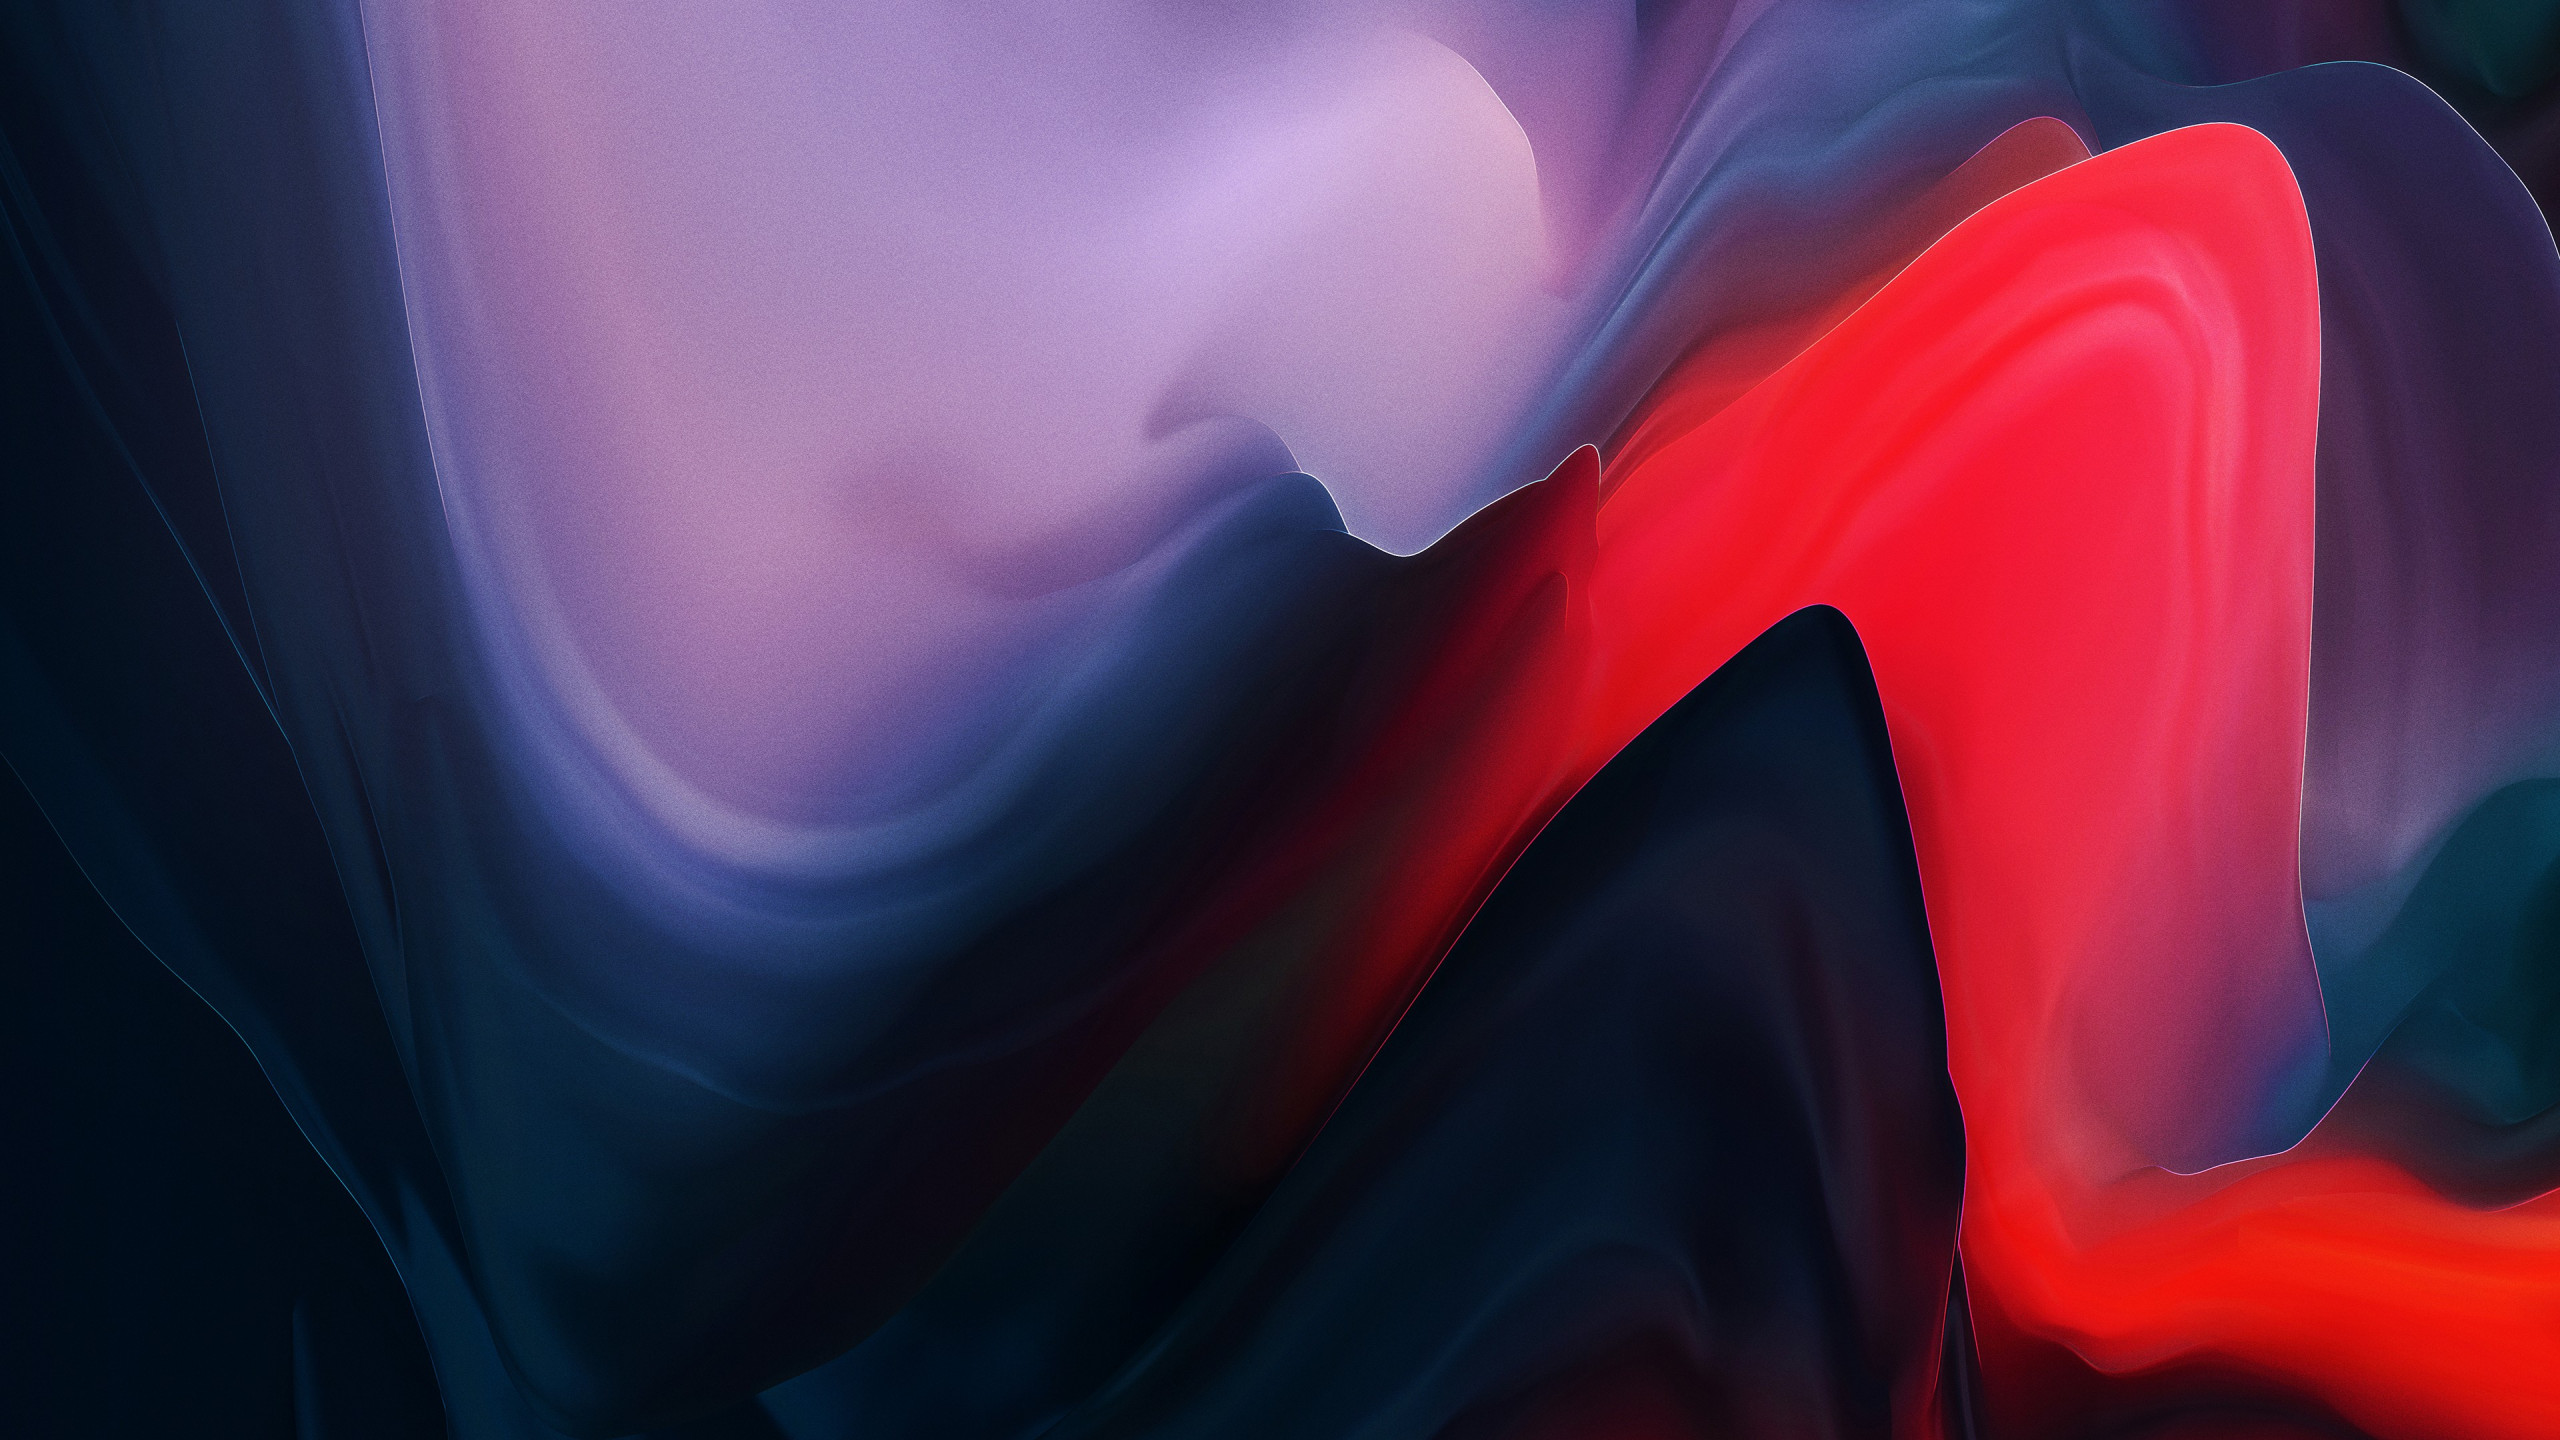 The Abstract from OnePlus 6T wallpaper 2560x1440